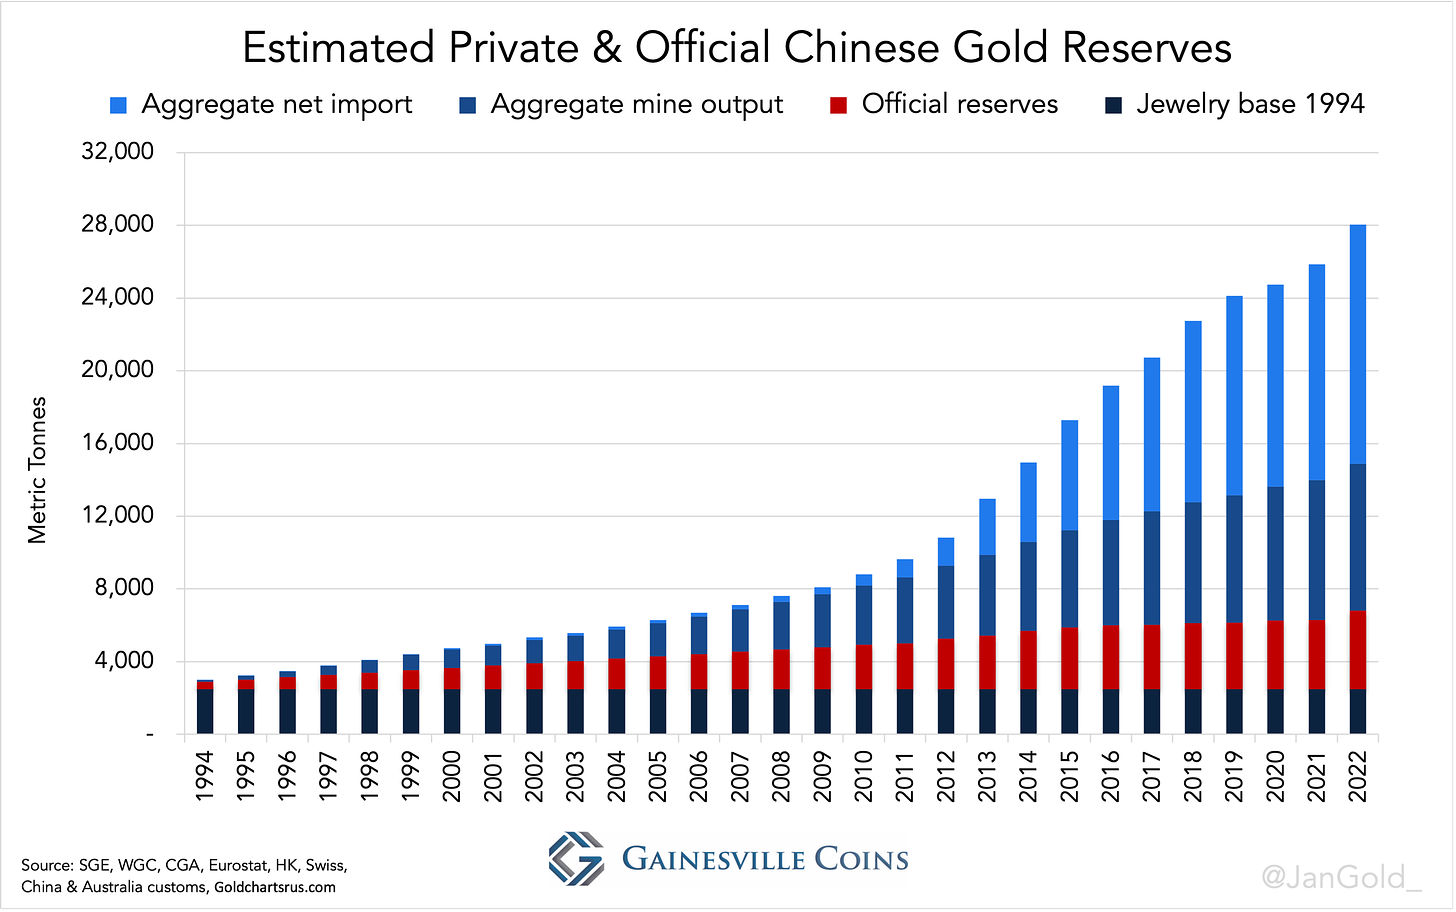 Estimated Private & Official Chinese Gold Reserves